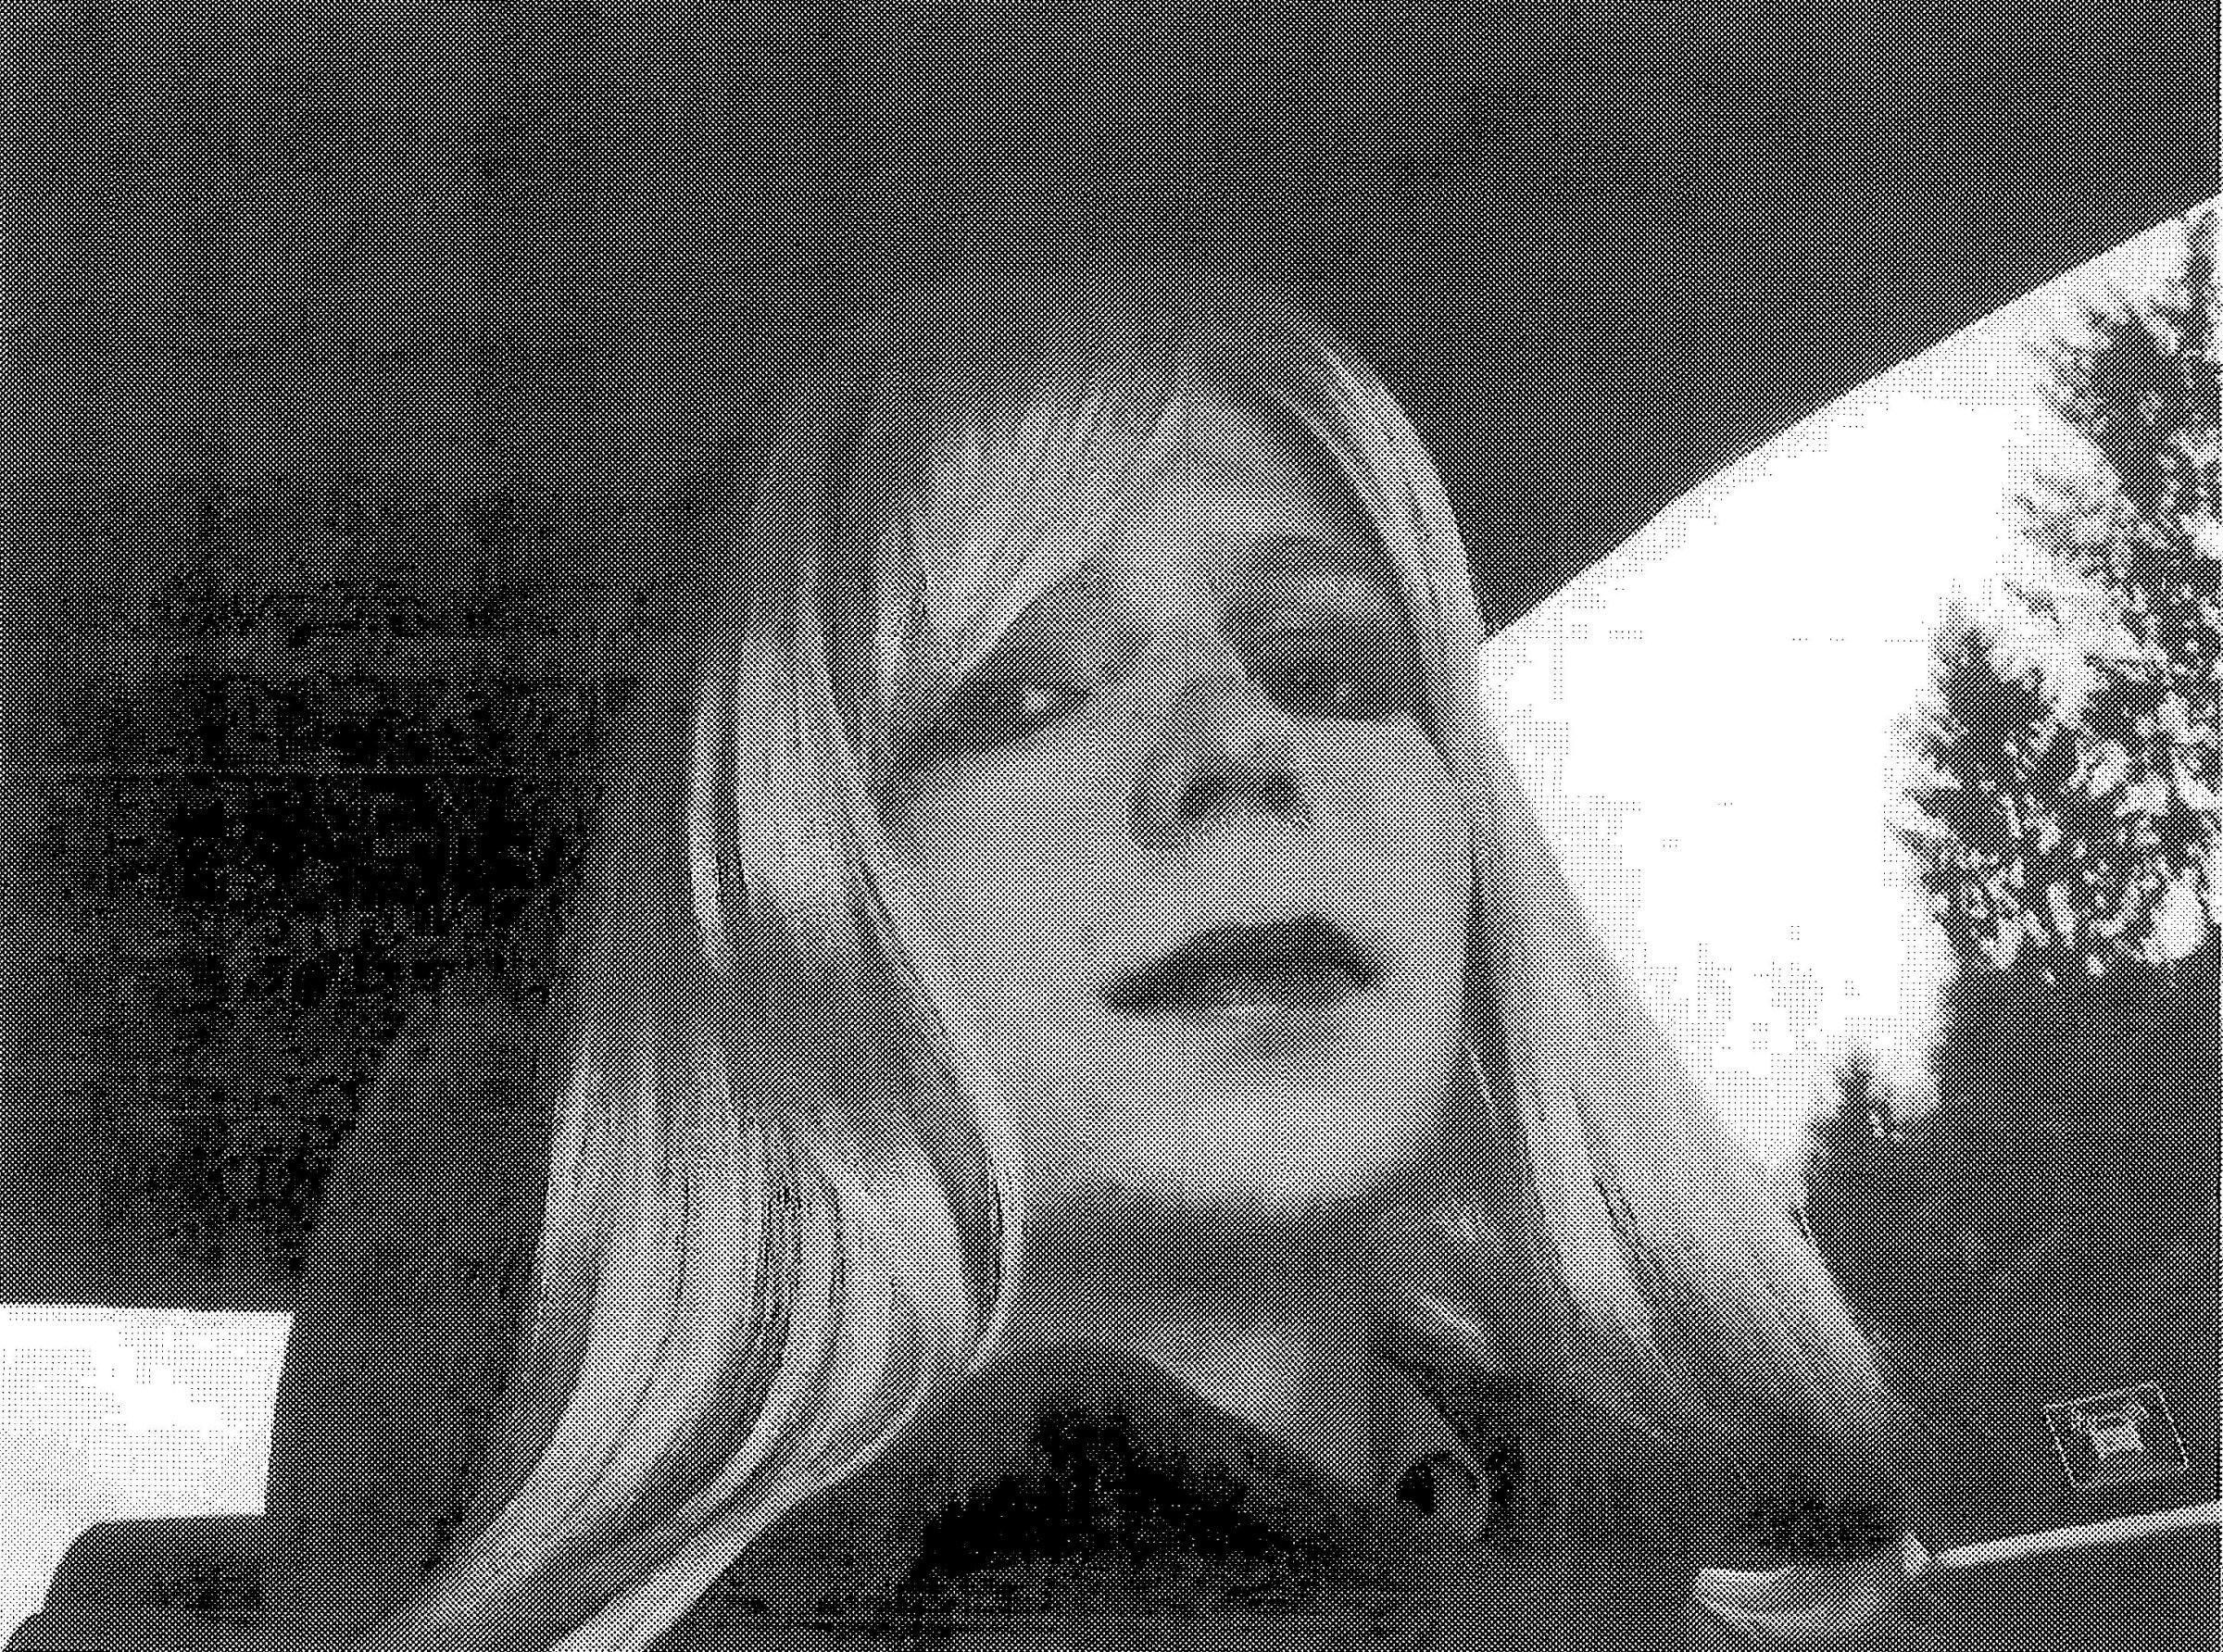 U.S. Army Private First Class Chelsea Manning in 2010.